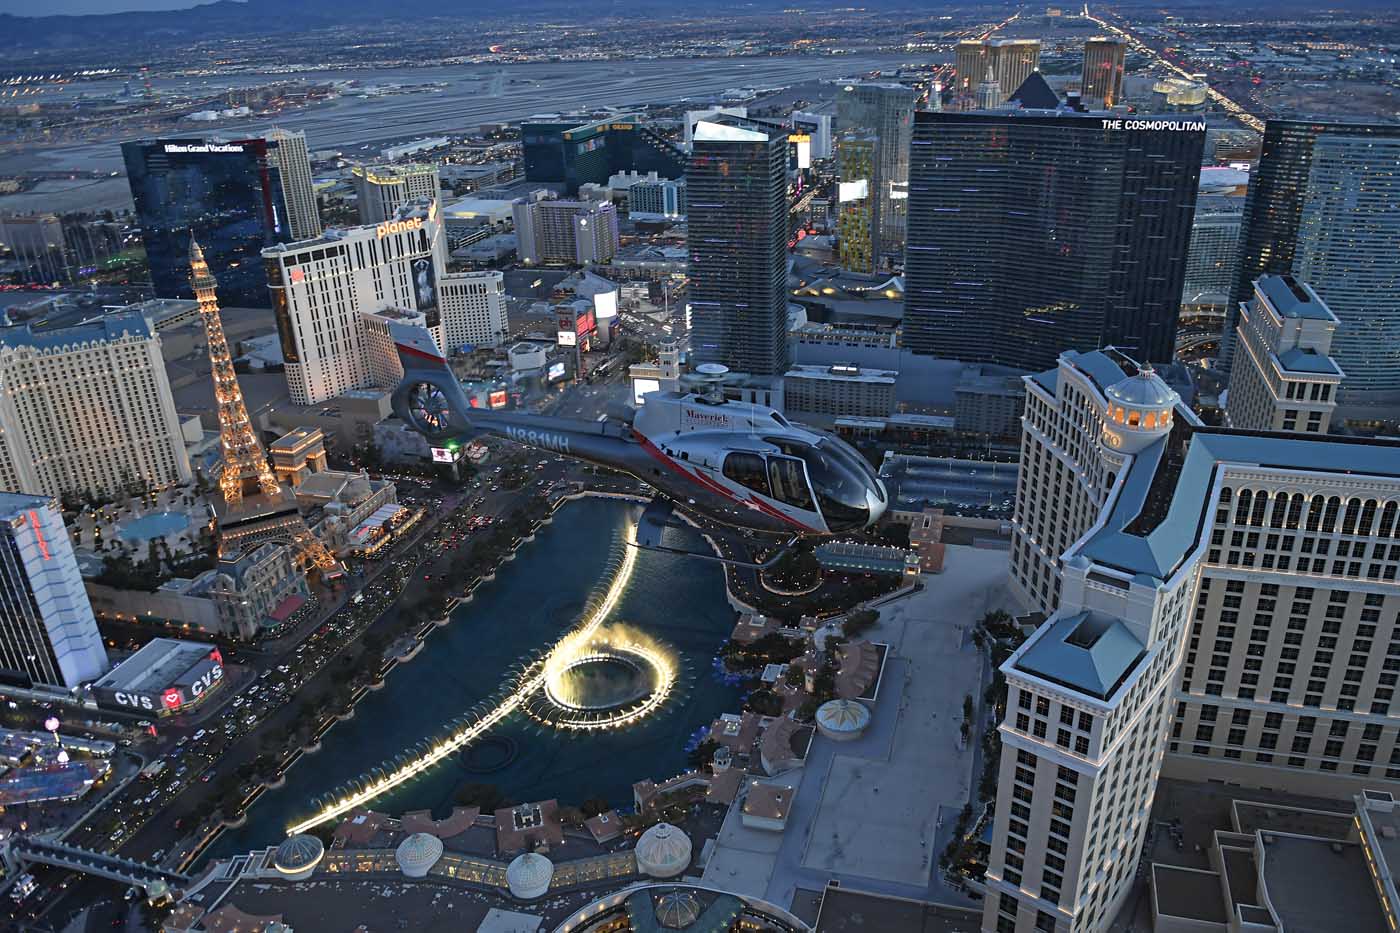 Aerial tourism company Maverick Helicopters reopened its operations on May 22, offering customers a buy-one-get-one offer on helicopter flights over Las Vegas, Nevada. Anthony Pecchi Photo